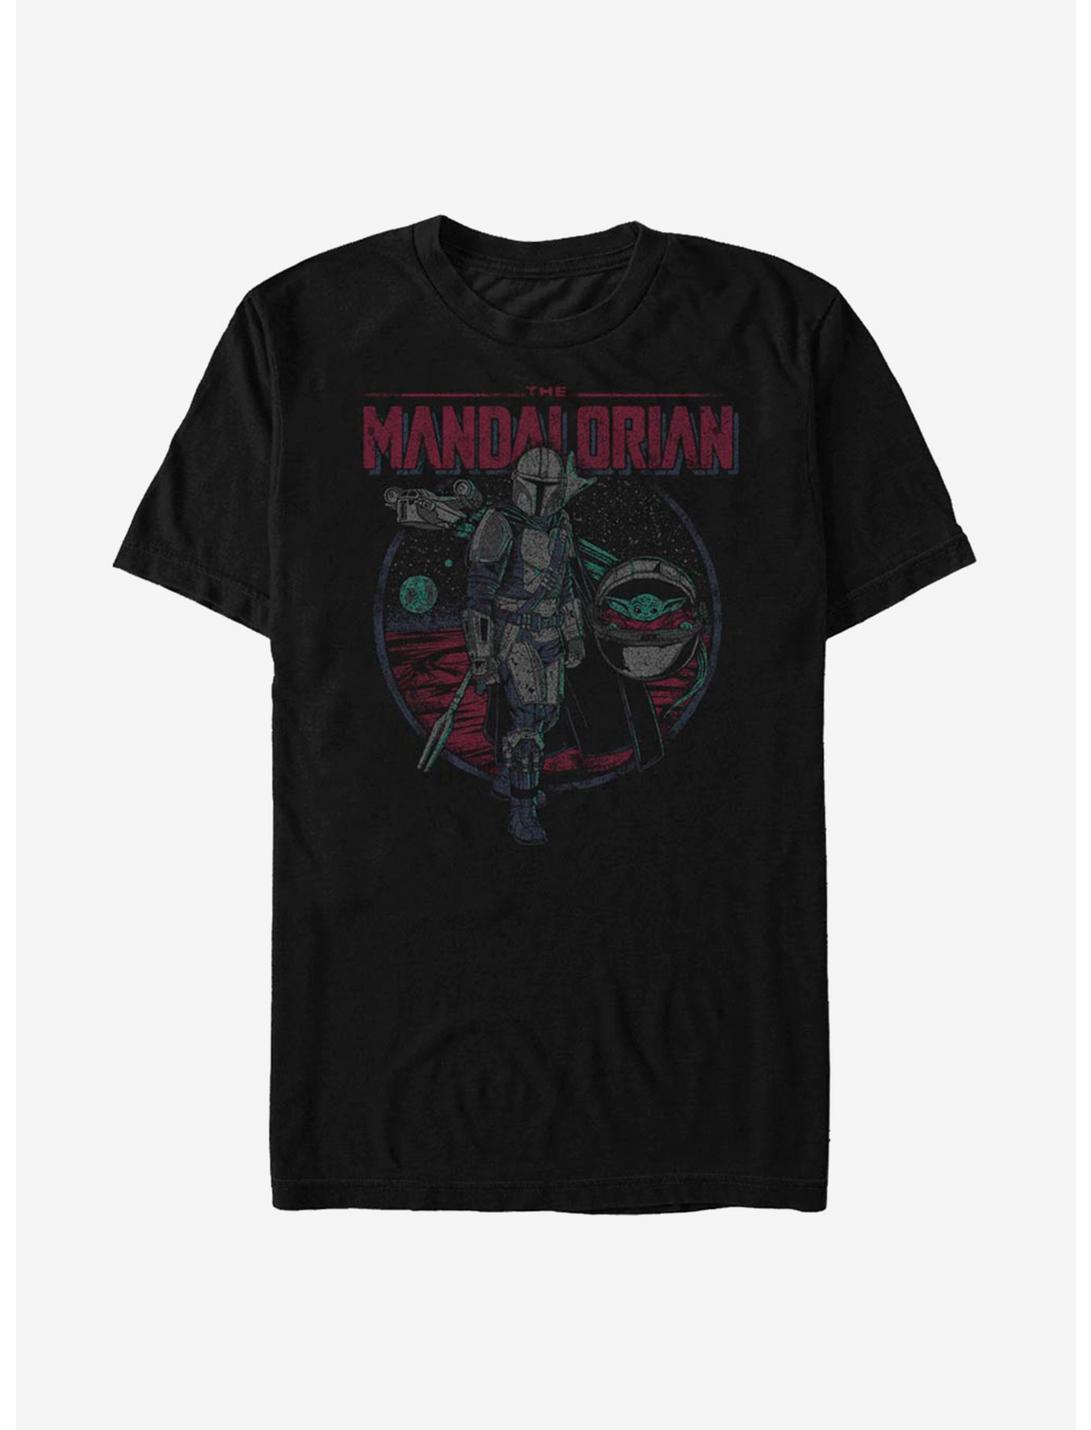 Star Wars The Mandalorian The Child Adorable Space Muppet T-Shirt, BLACK, hi-res